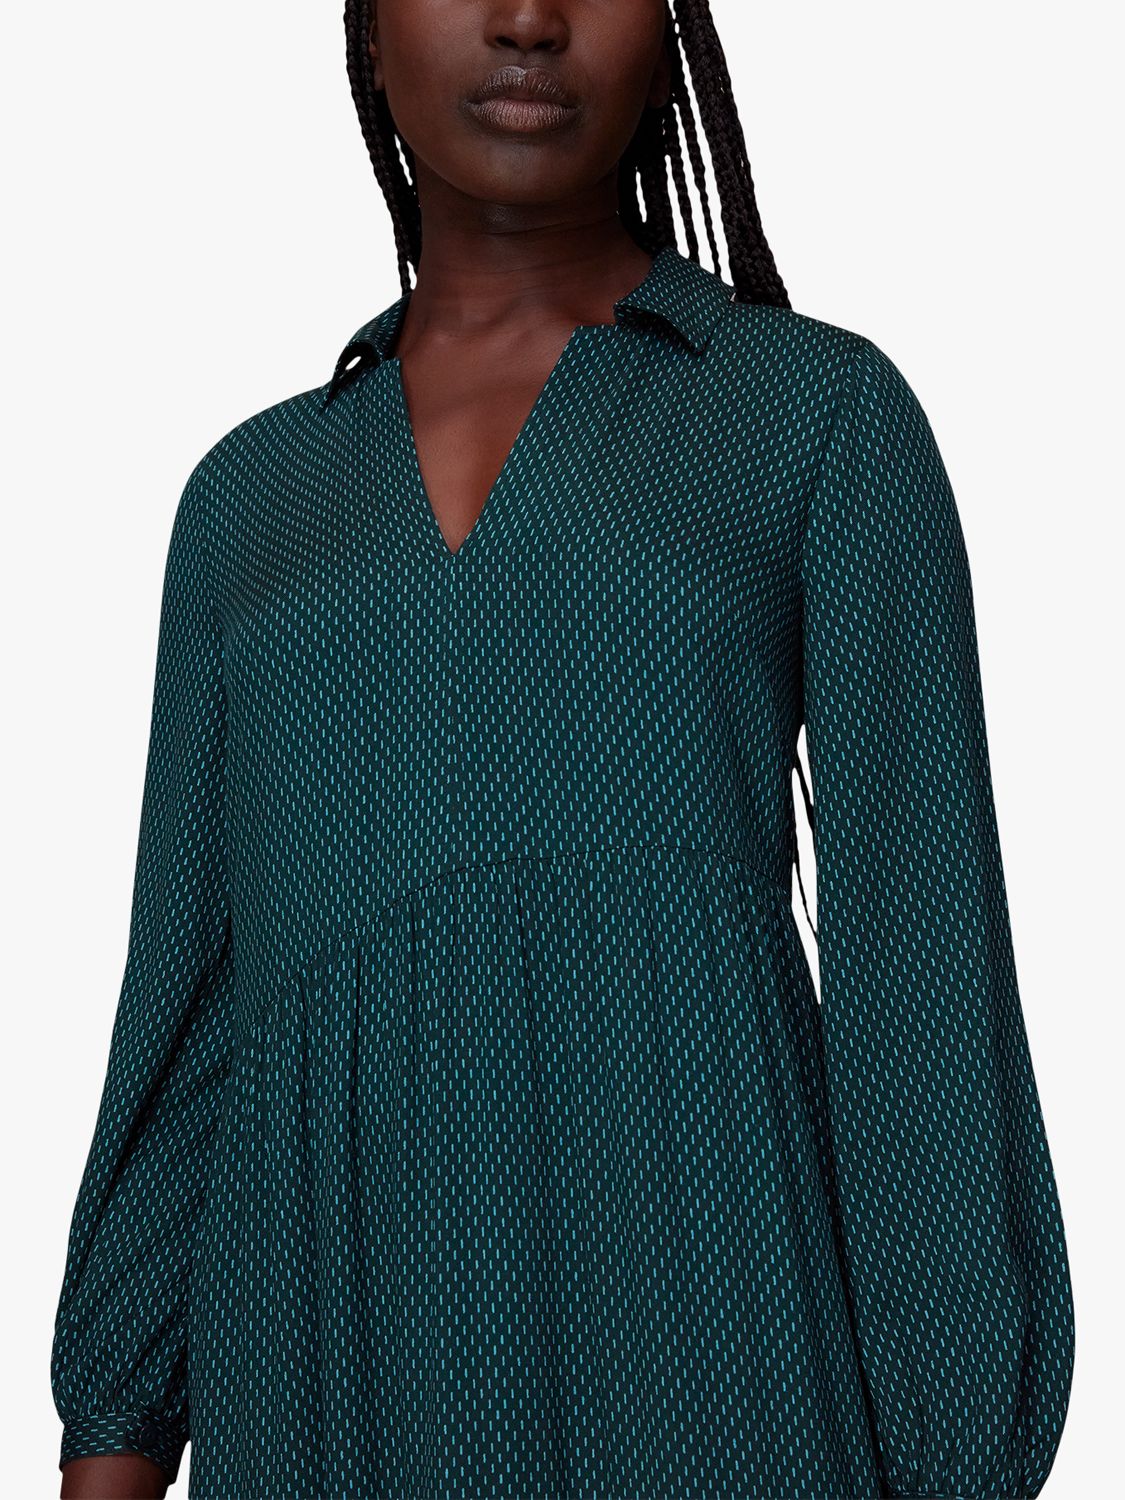 Buy Whistles Vertical Dash Trapeze Dress, Green Online at johnlewis.com